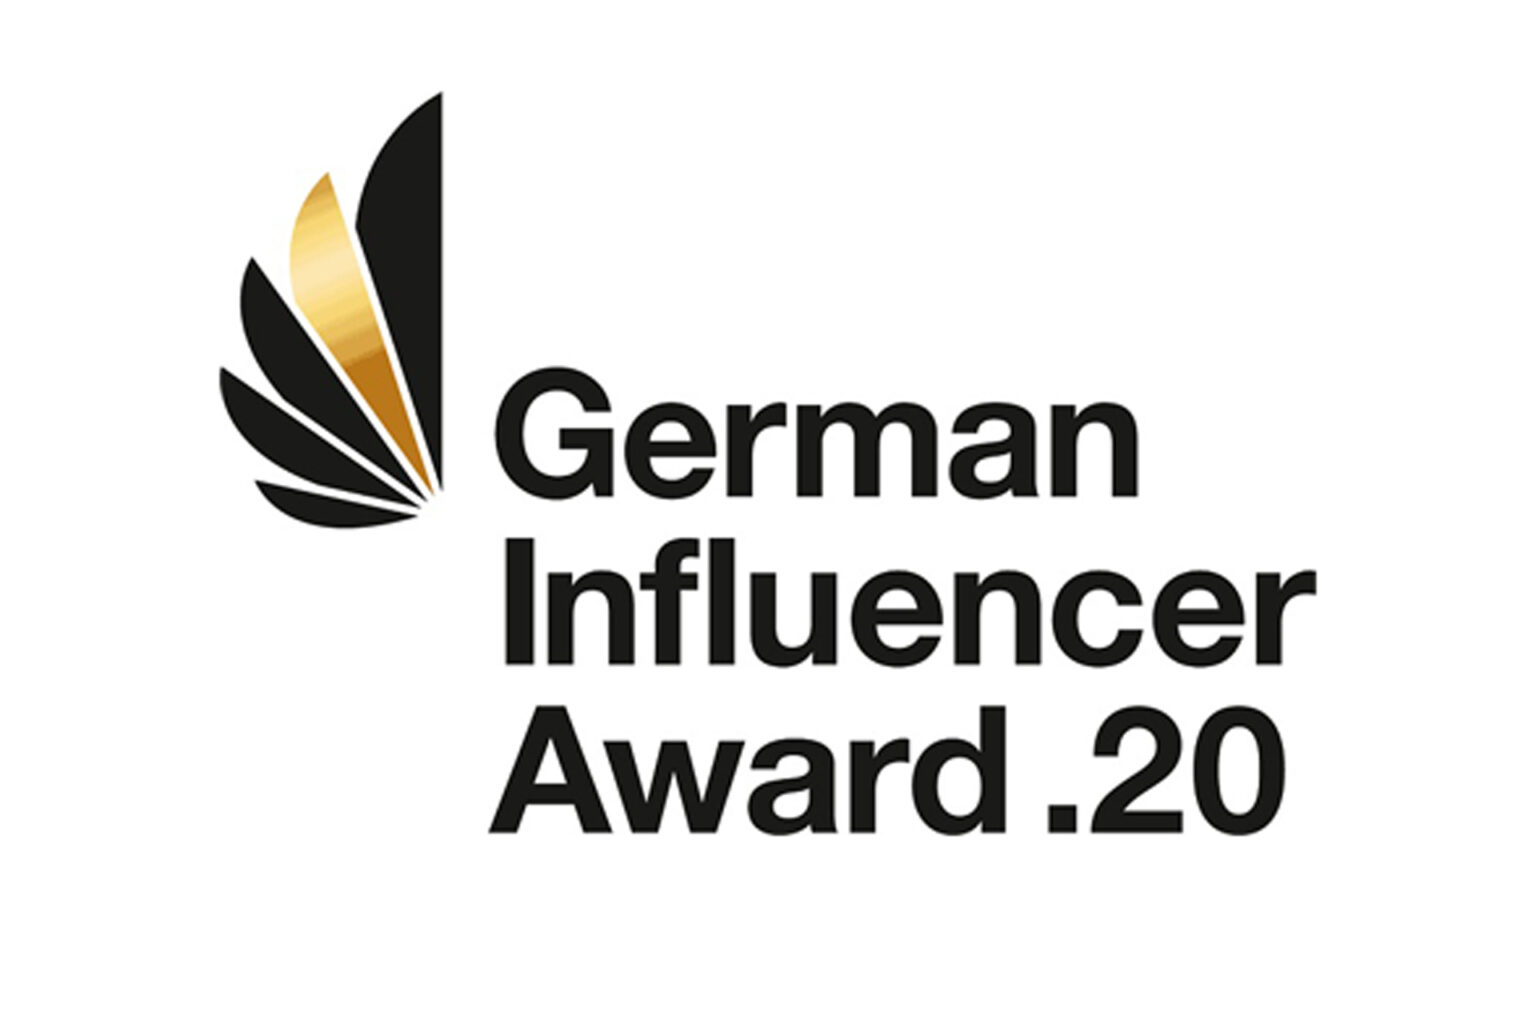 German Influencer Award. Donations in favour of the Peter Ustinov Foundation